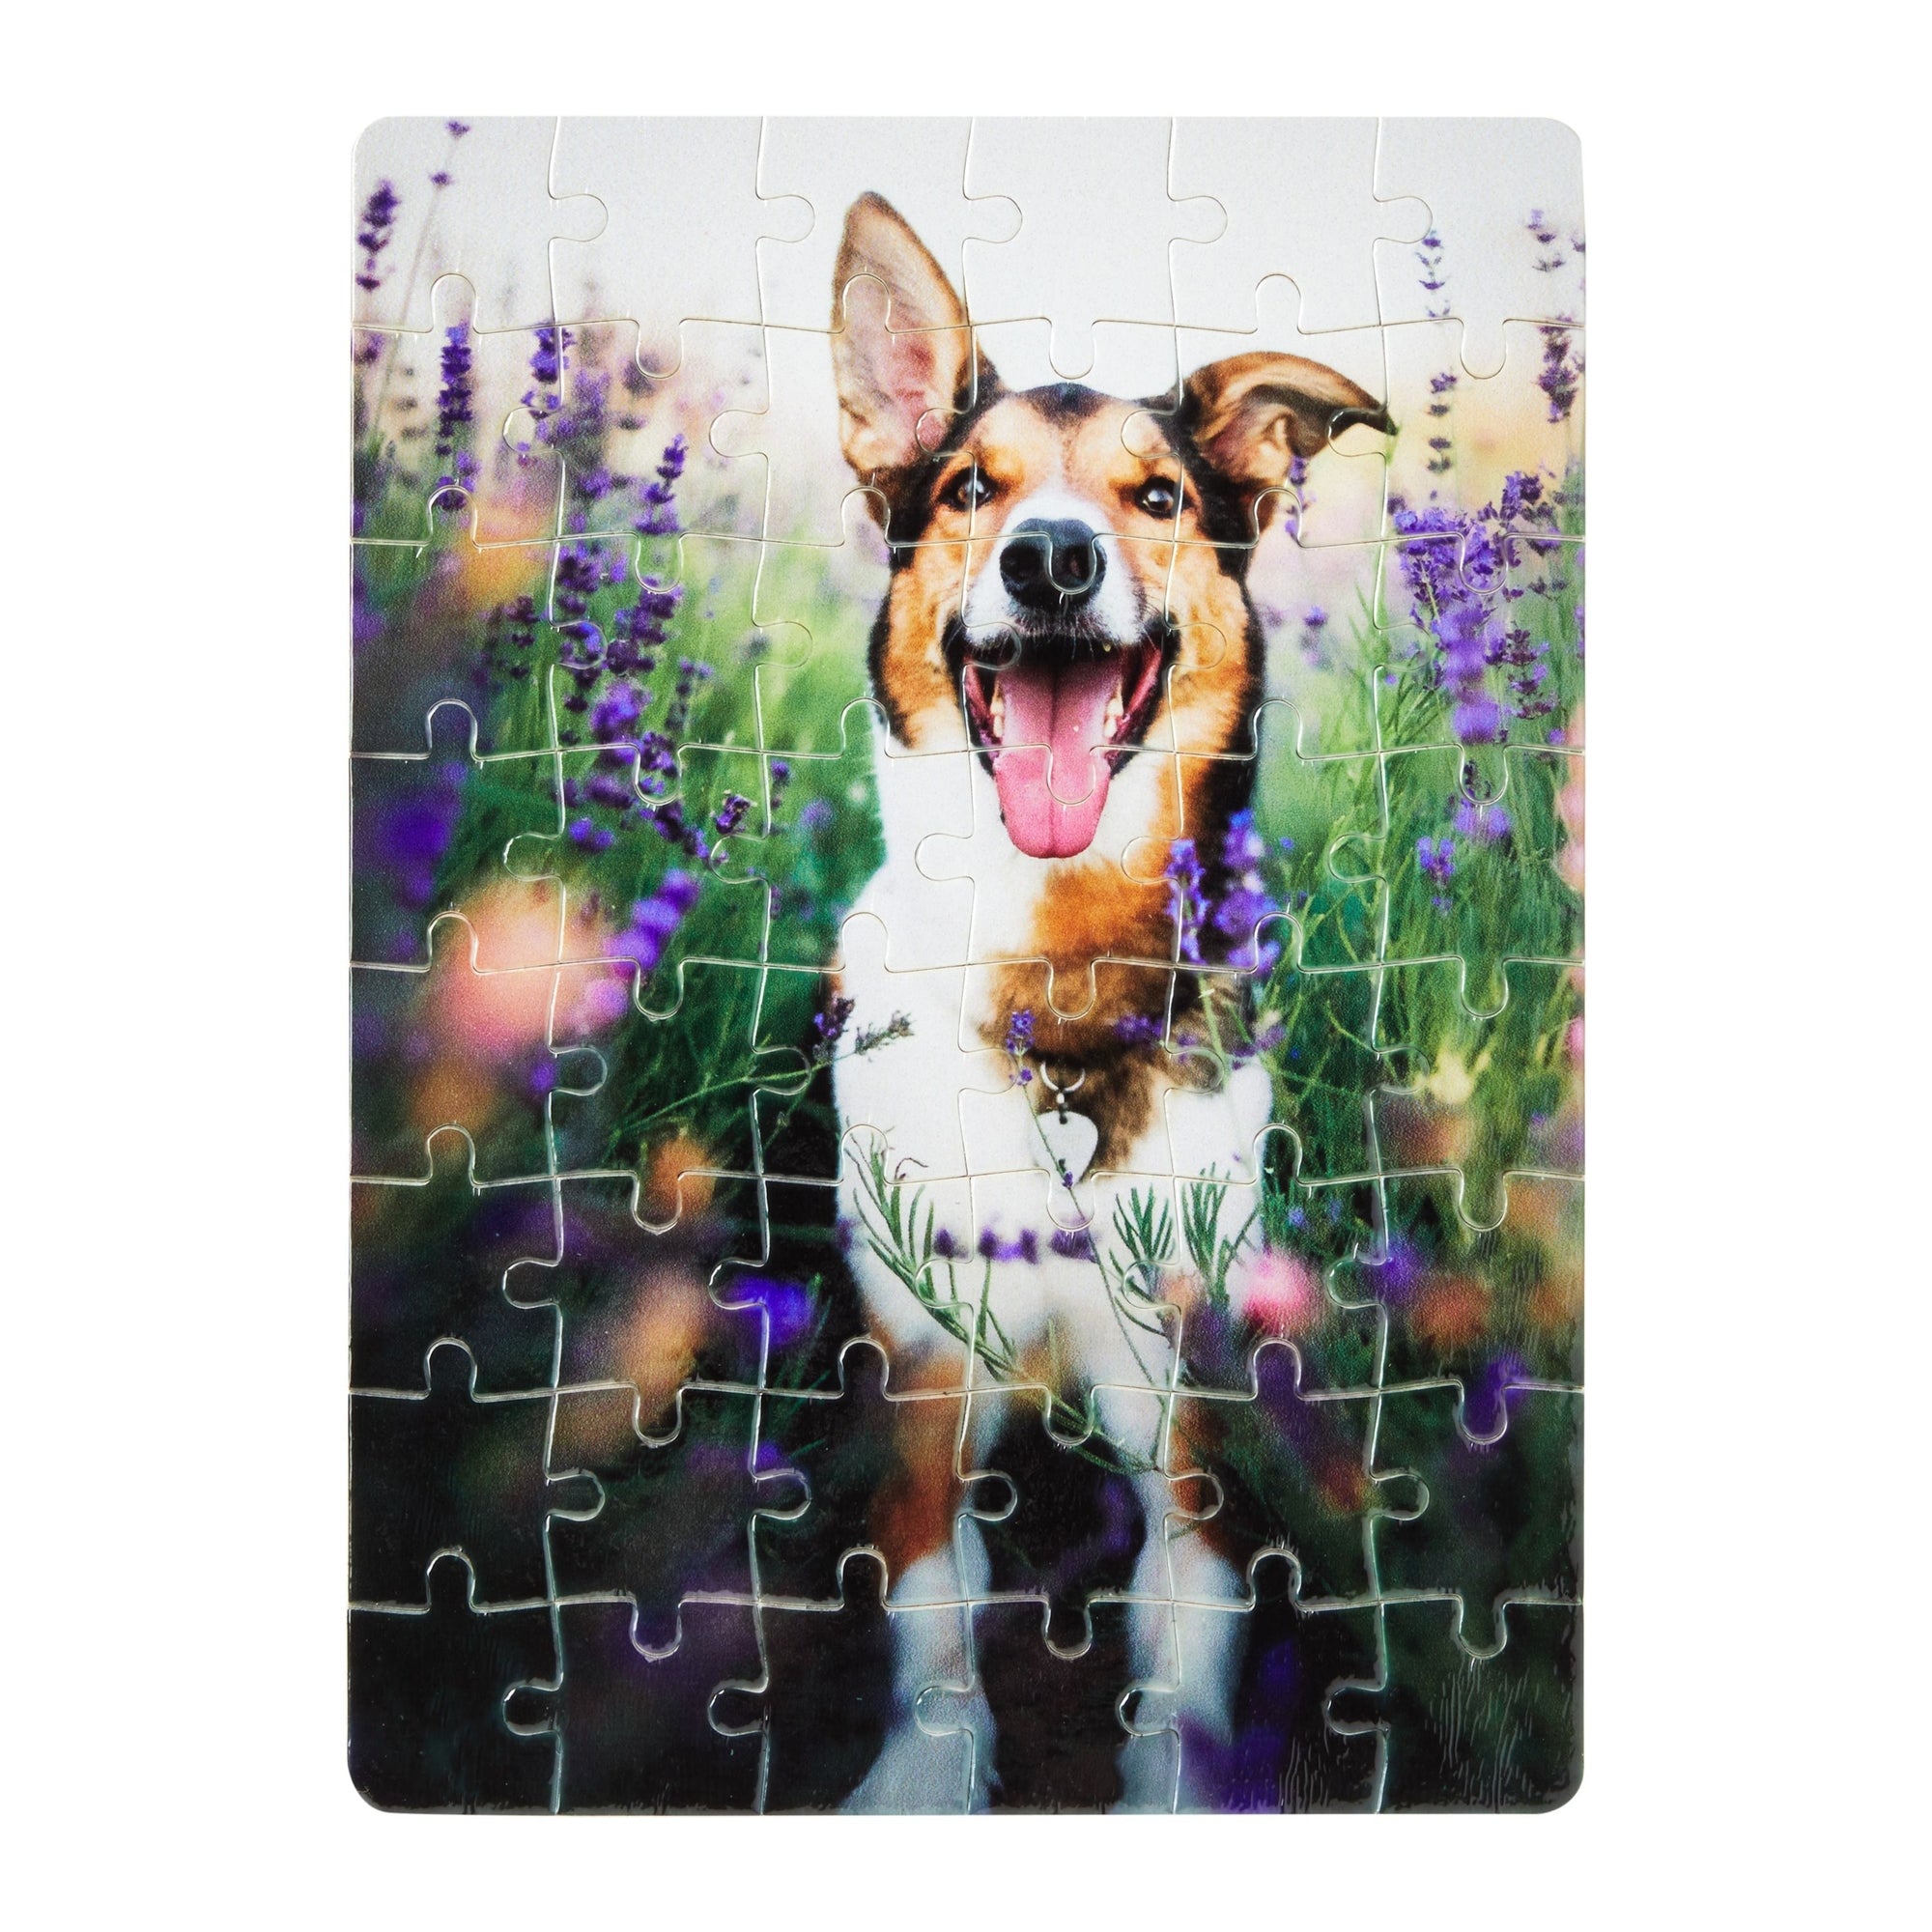 Bright Creations 10 Sets Blank Sublimation Puzzles for DIY Crafts, 210-Piece Jigsaws for Heat Press Thermal Transfer, 12 x 11 in